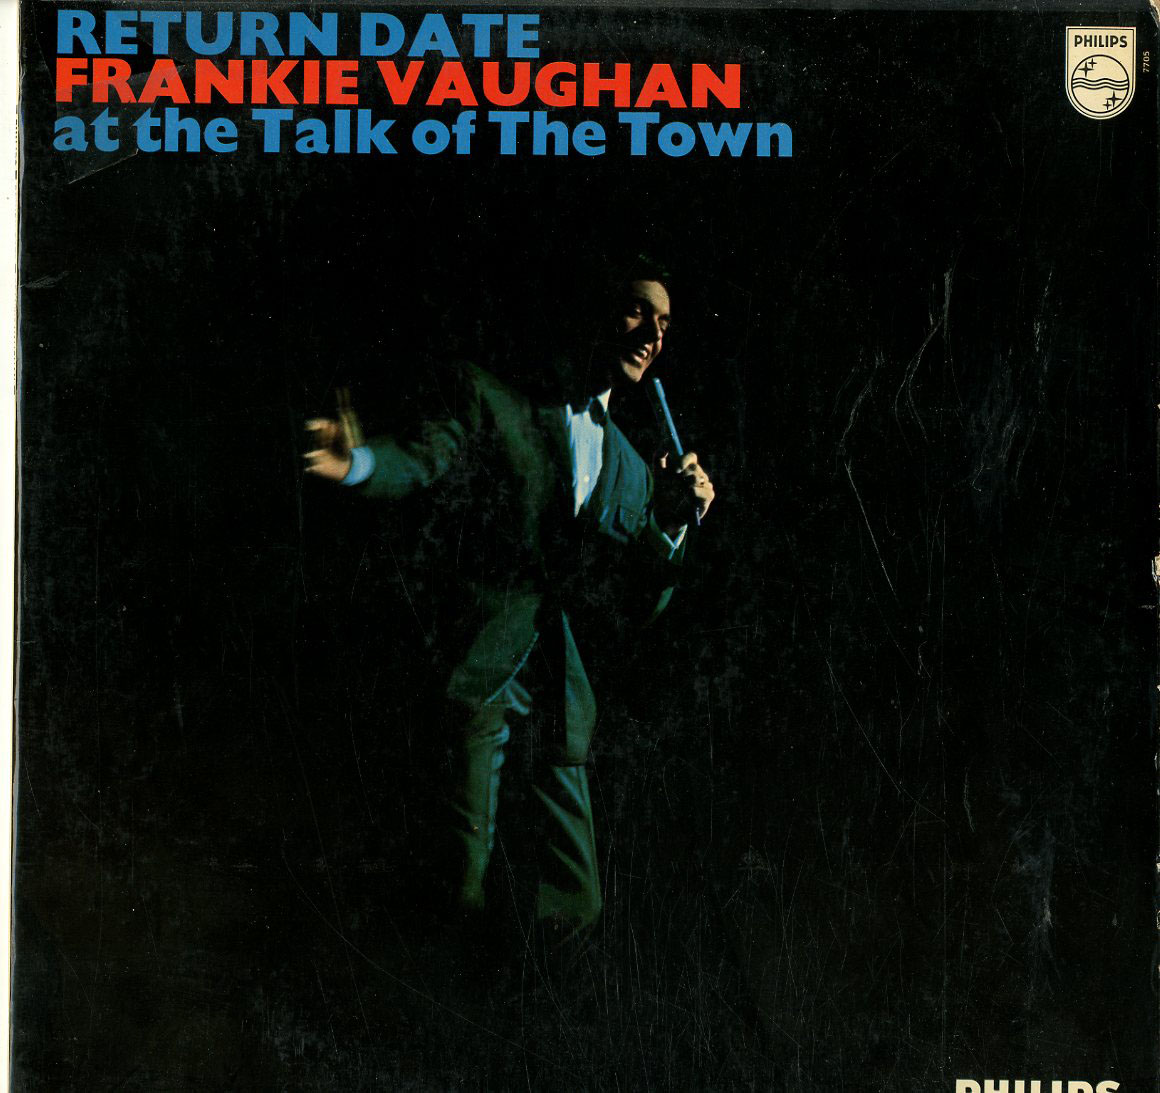 Albumcover Frankie Vaughan - Return Date at the Talk of the Town